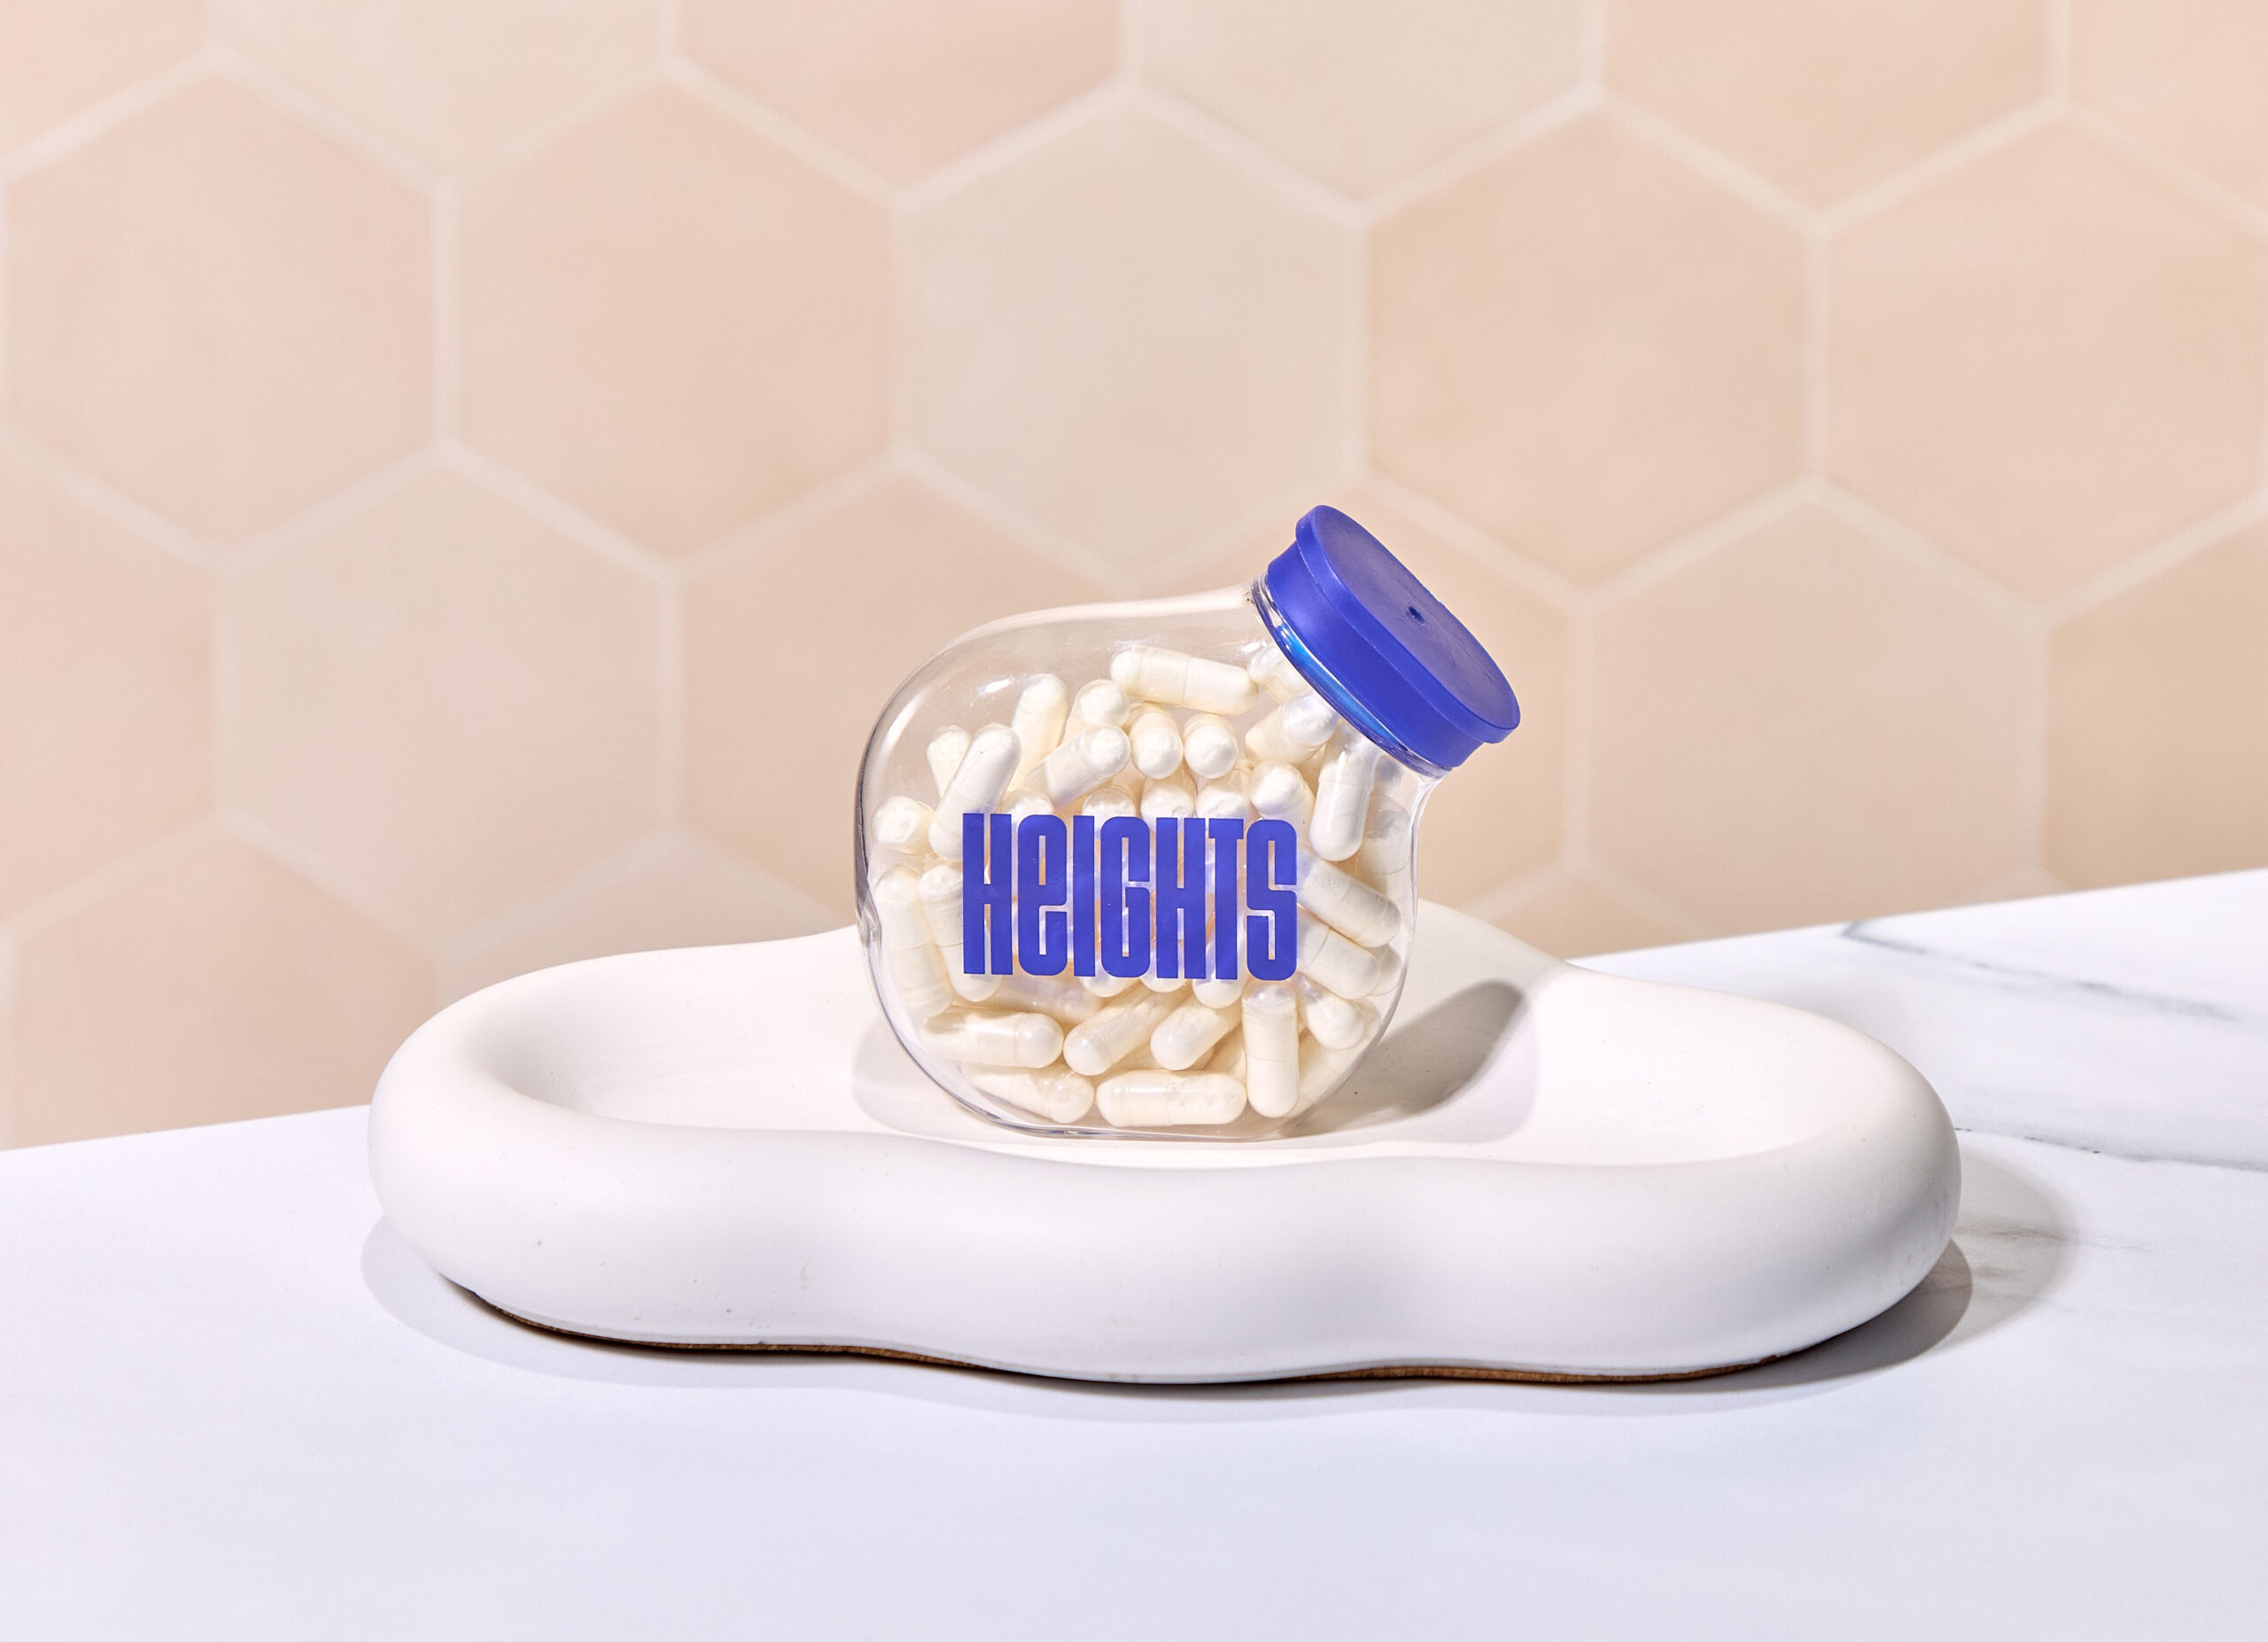 Heights launches magnesium product to provide health bundle